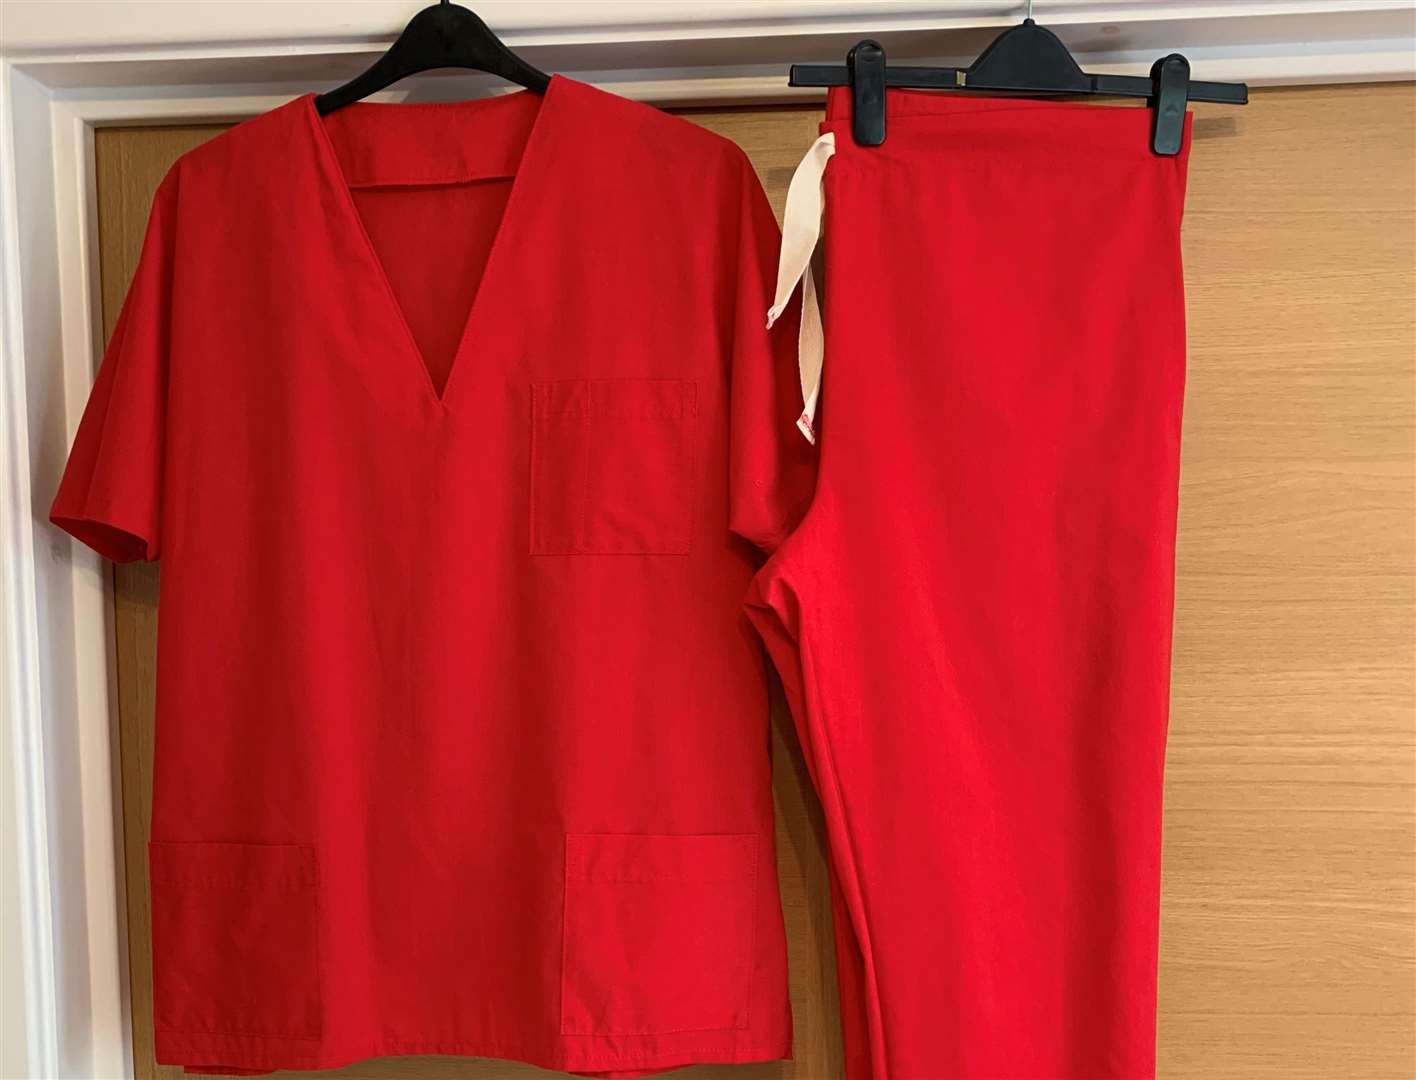 A red scrub set made for a key worker